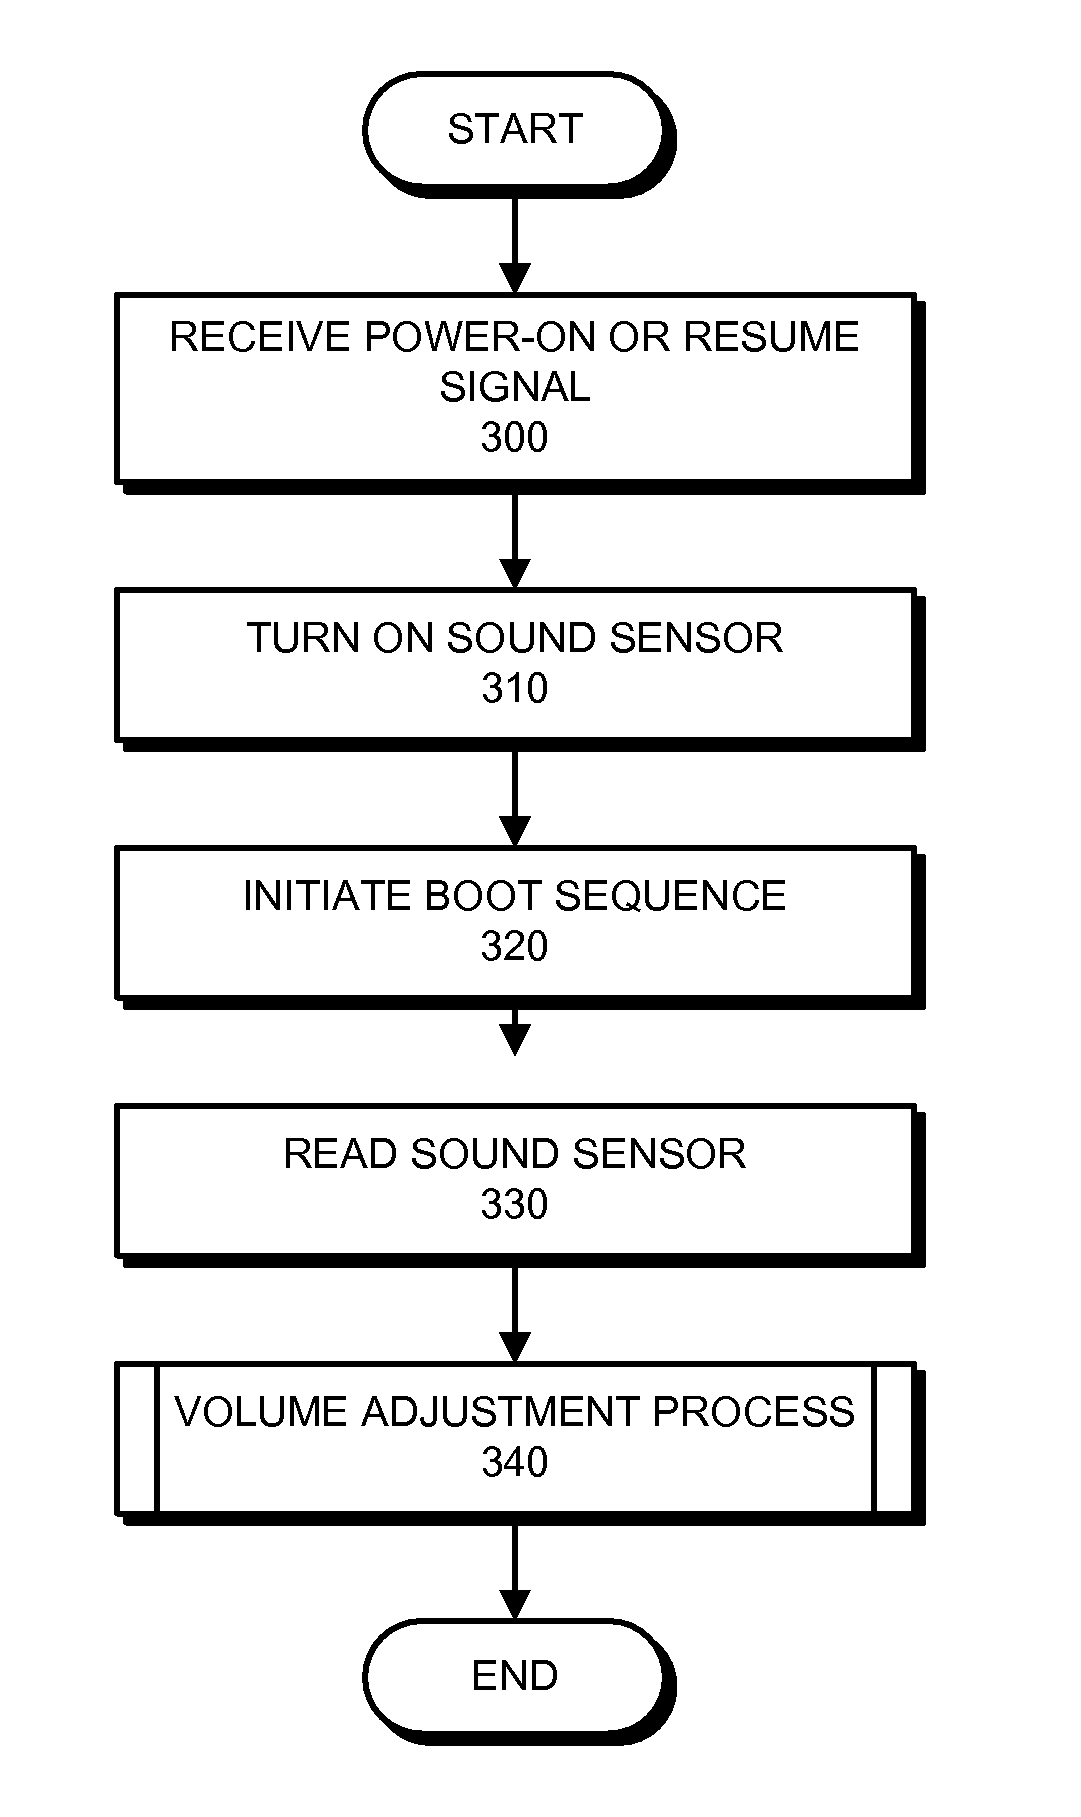 Method and apparatus for using a sound sensor to adjust the audio output for a device